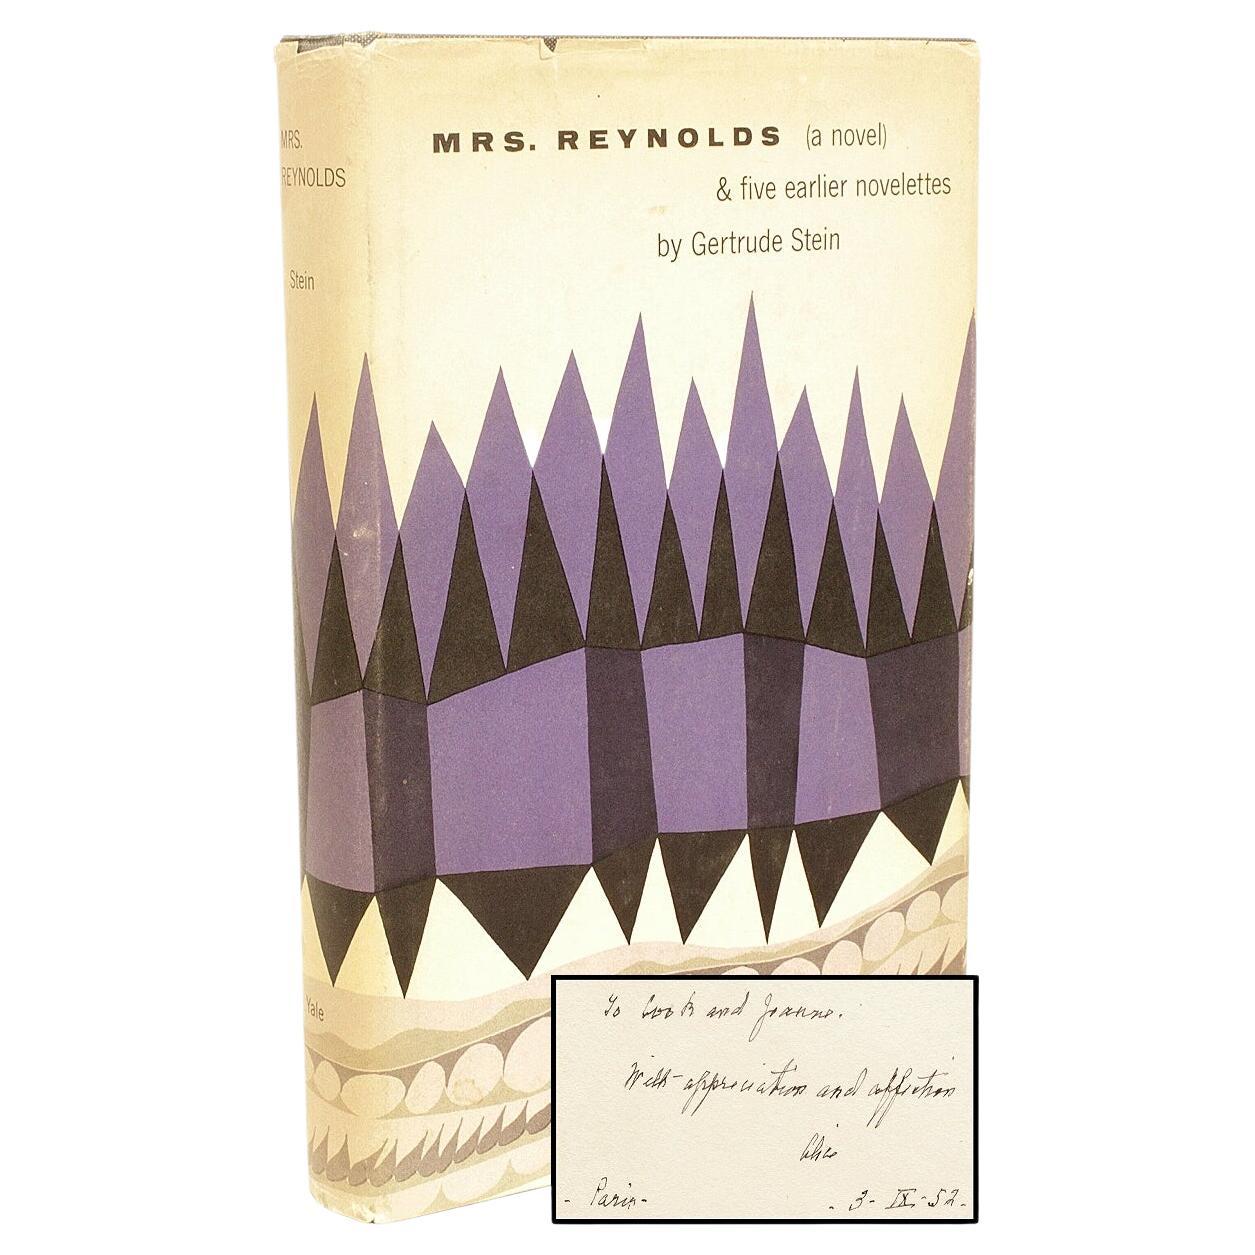 Gertrude Stein, Mrs. Reynolds. Inscribed by Alice Toklas, First Edition 1952